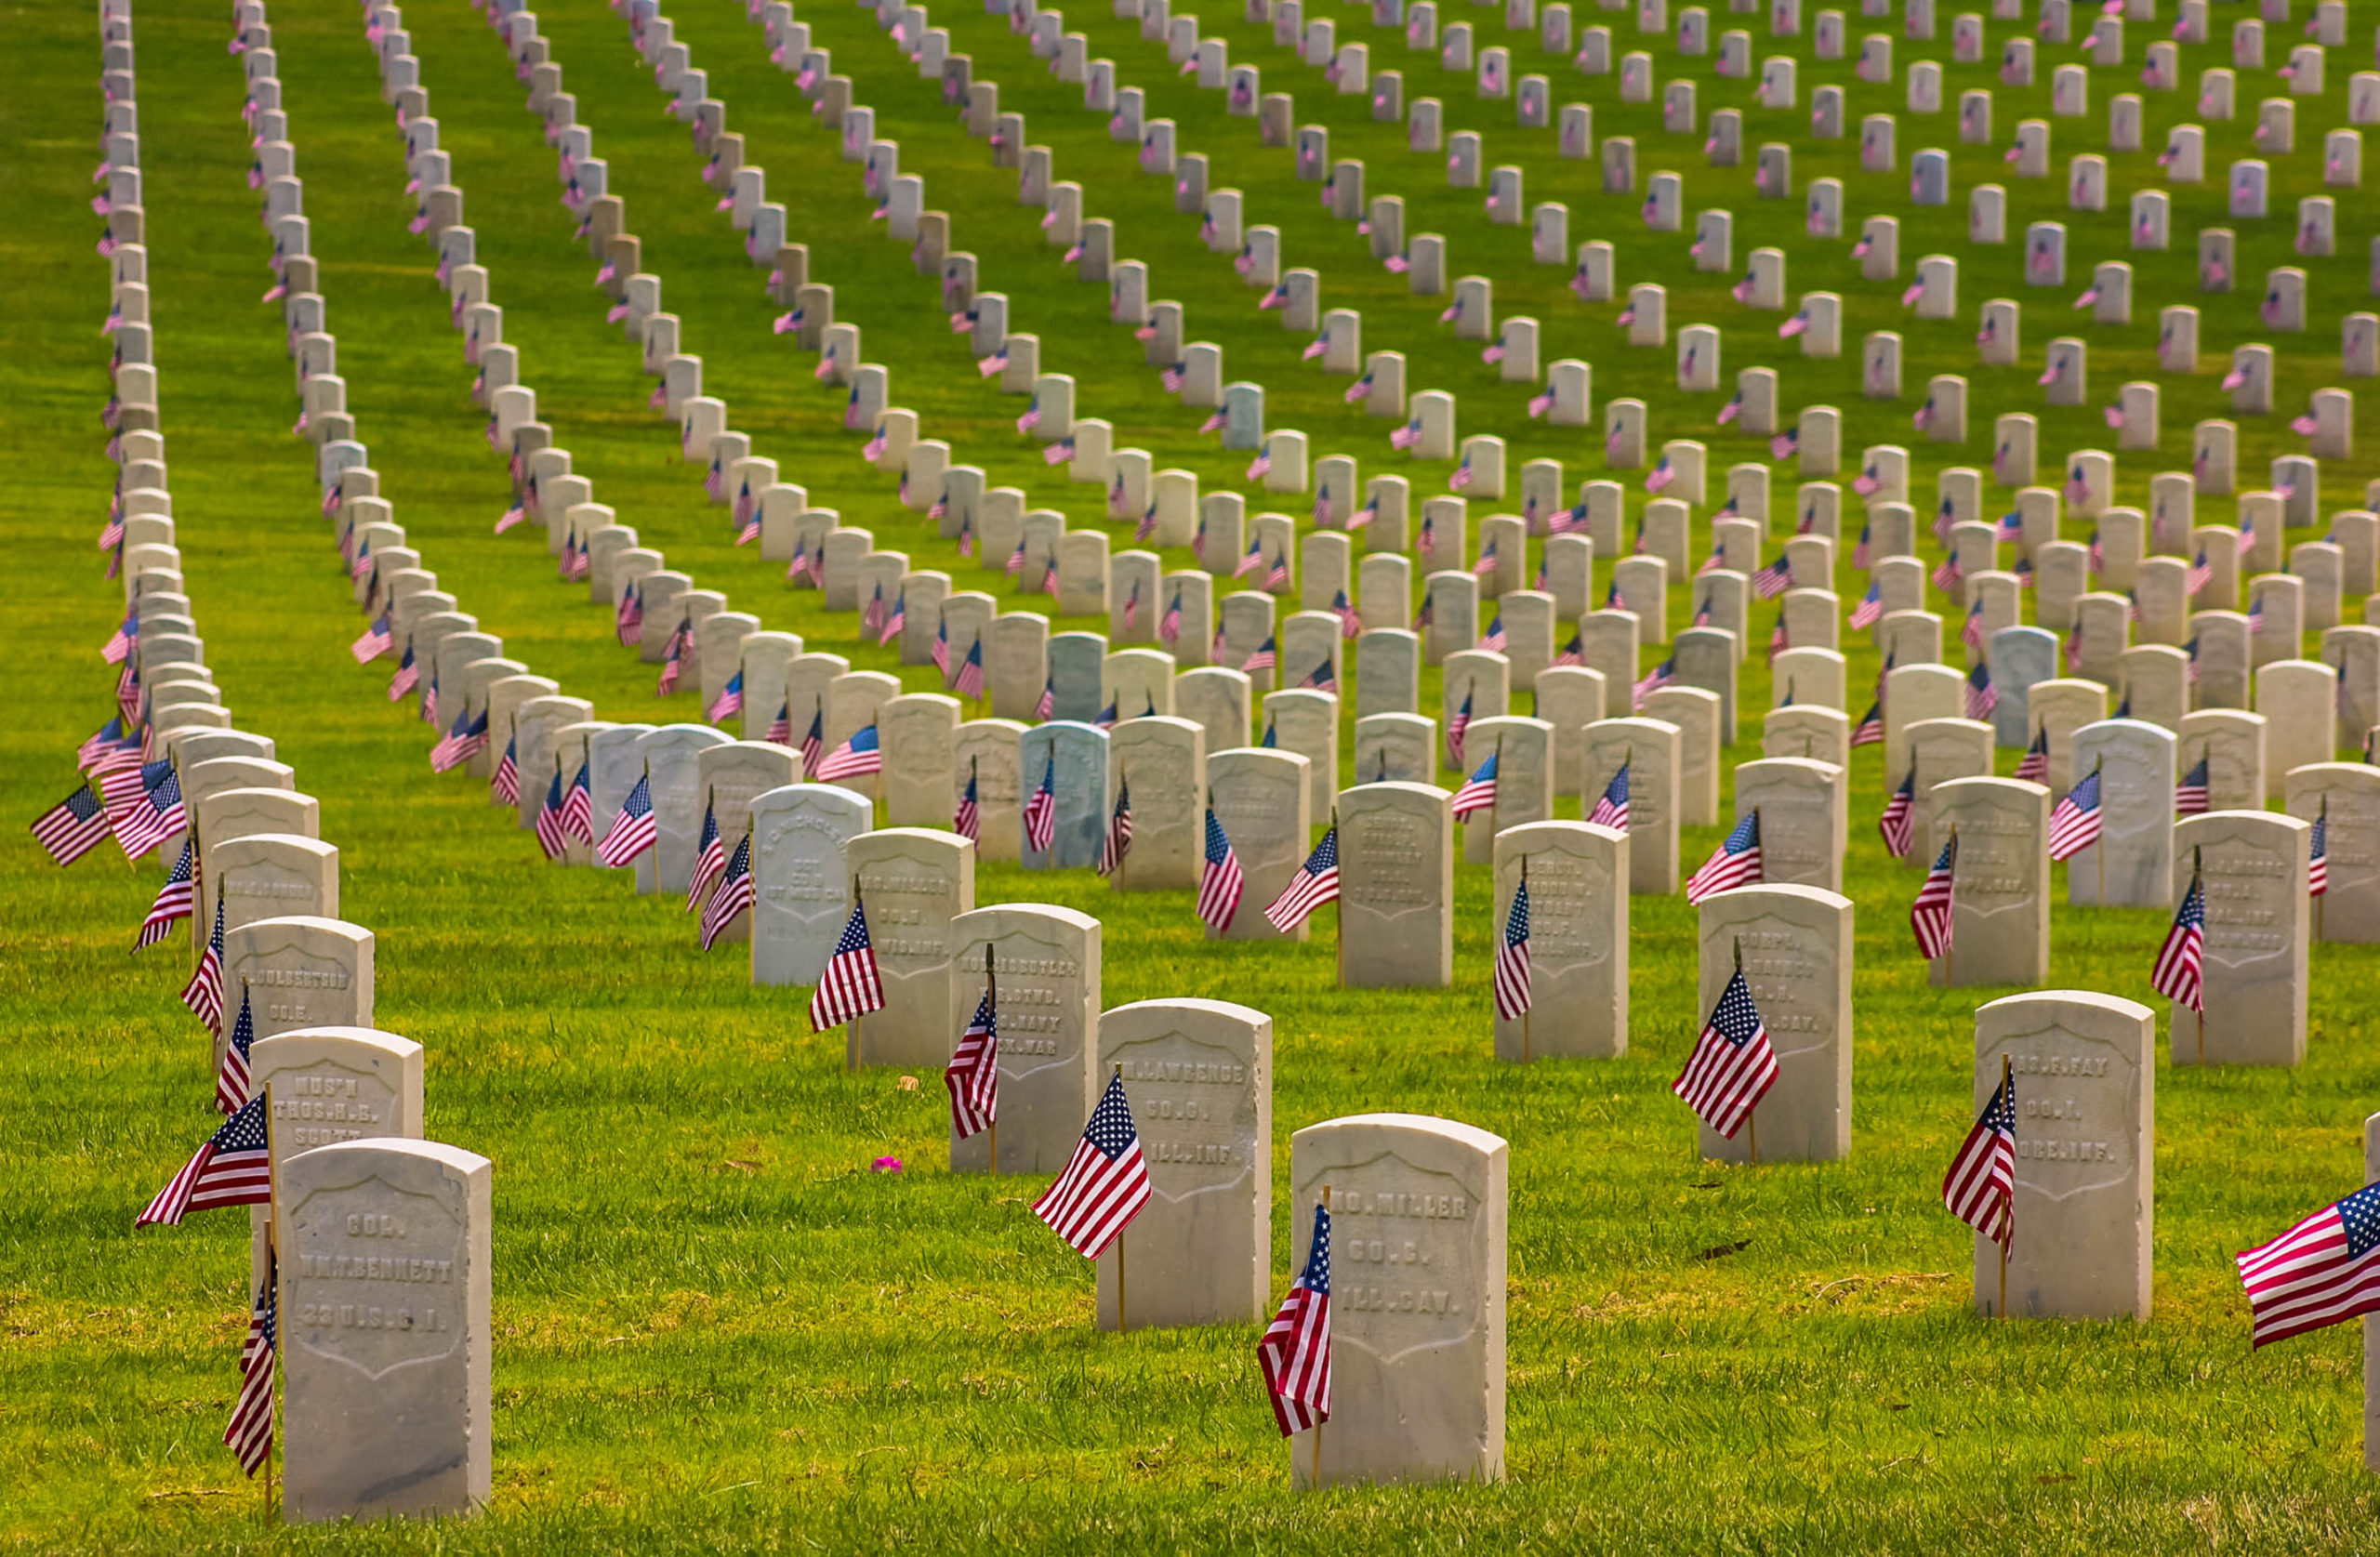 Boy Scouts banned from planting American flags on veterans' graves for Memorial Day due to coronavirus. #MemorialDay #BoyScouts